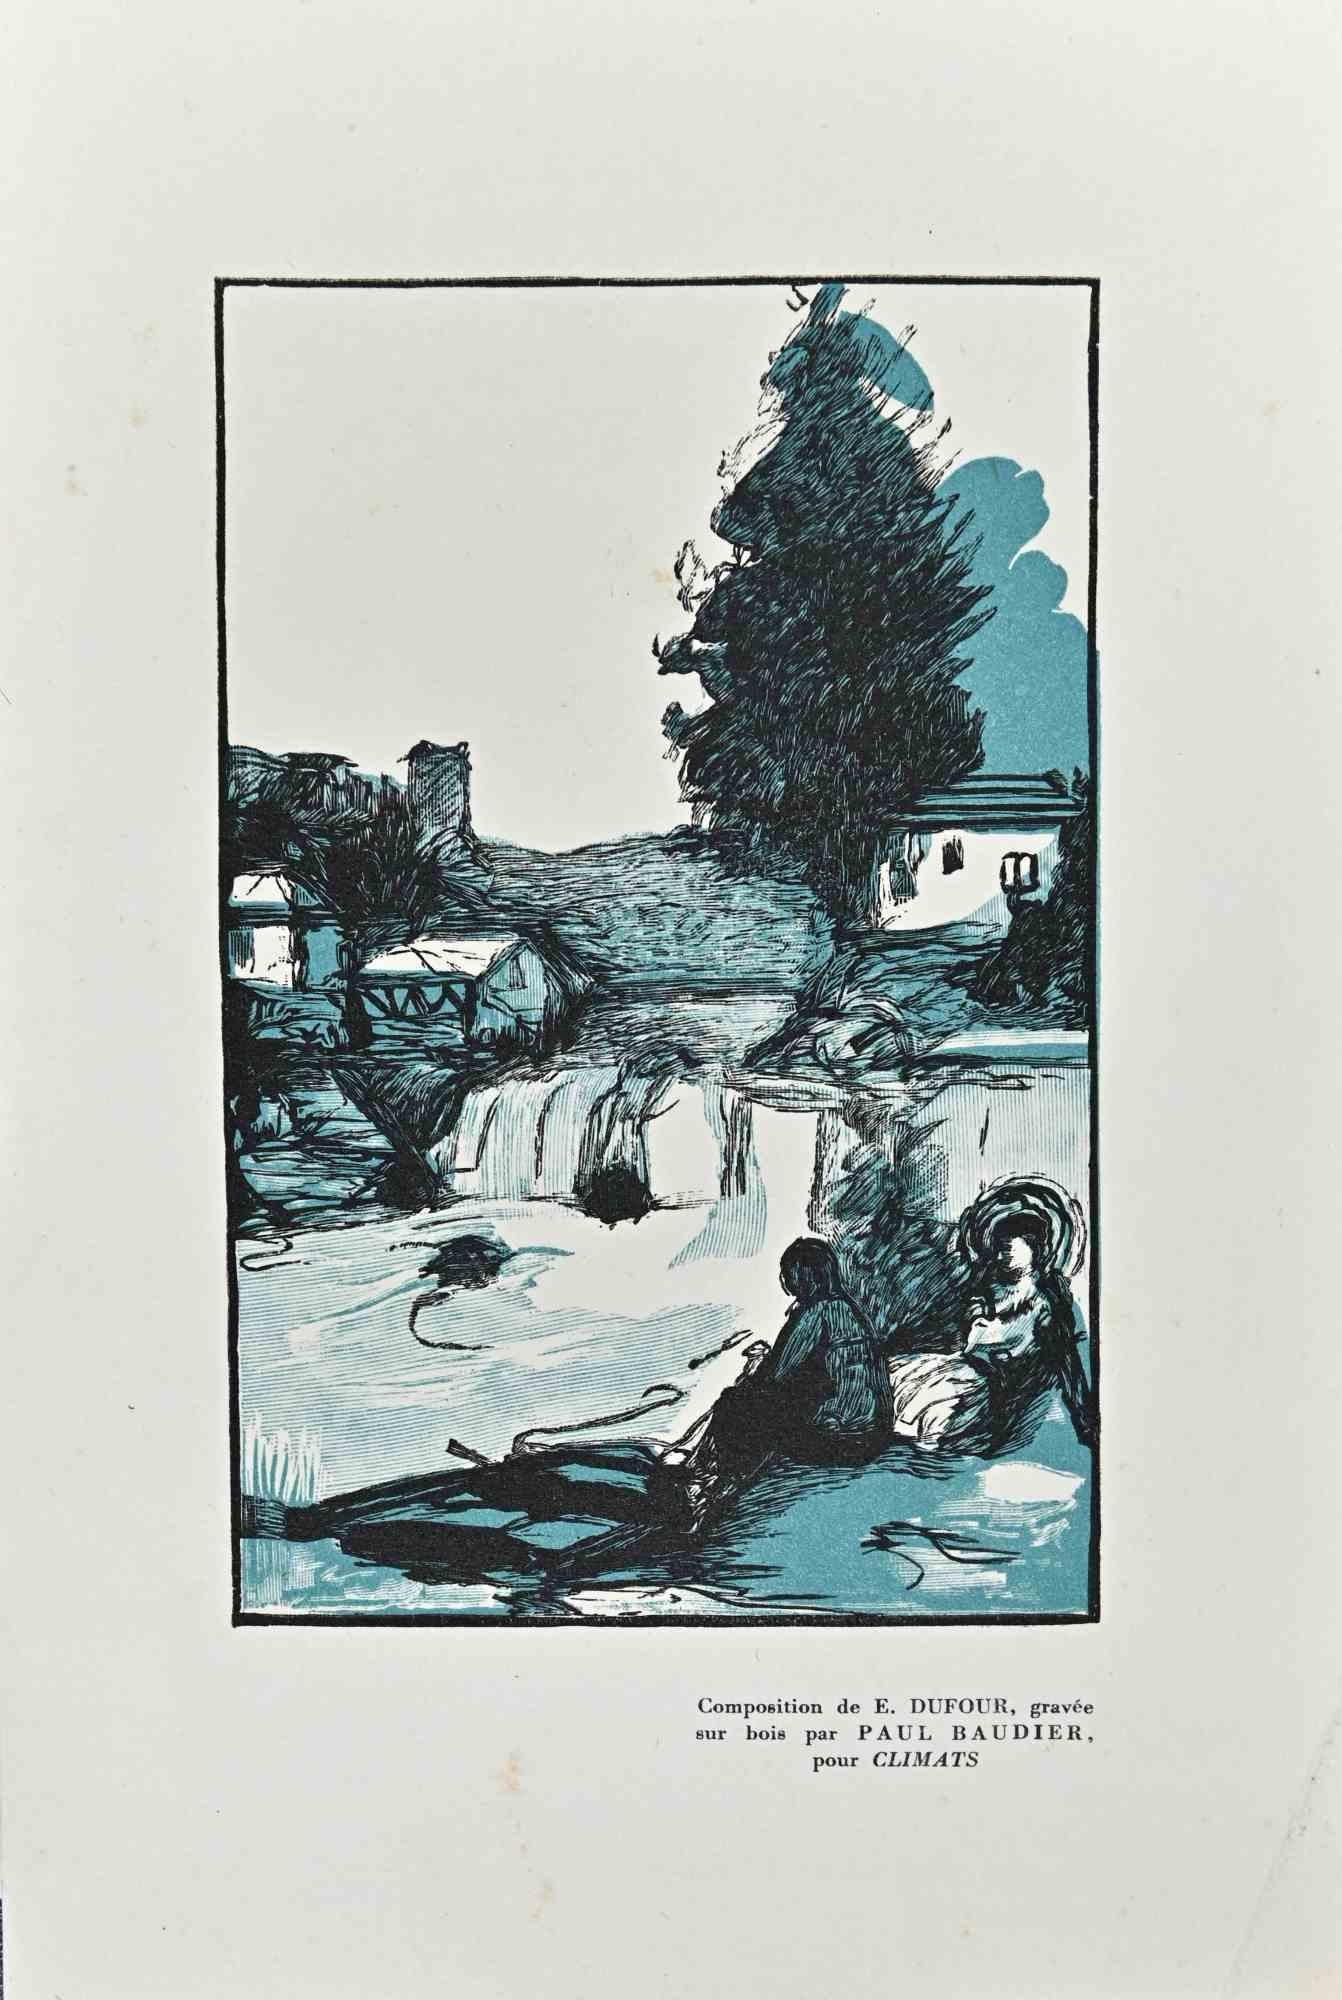 By The River - Original Woodcut Print by Paul Baudier - 1930s